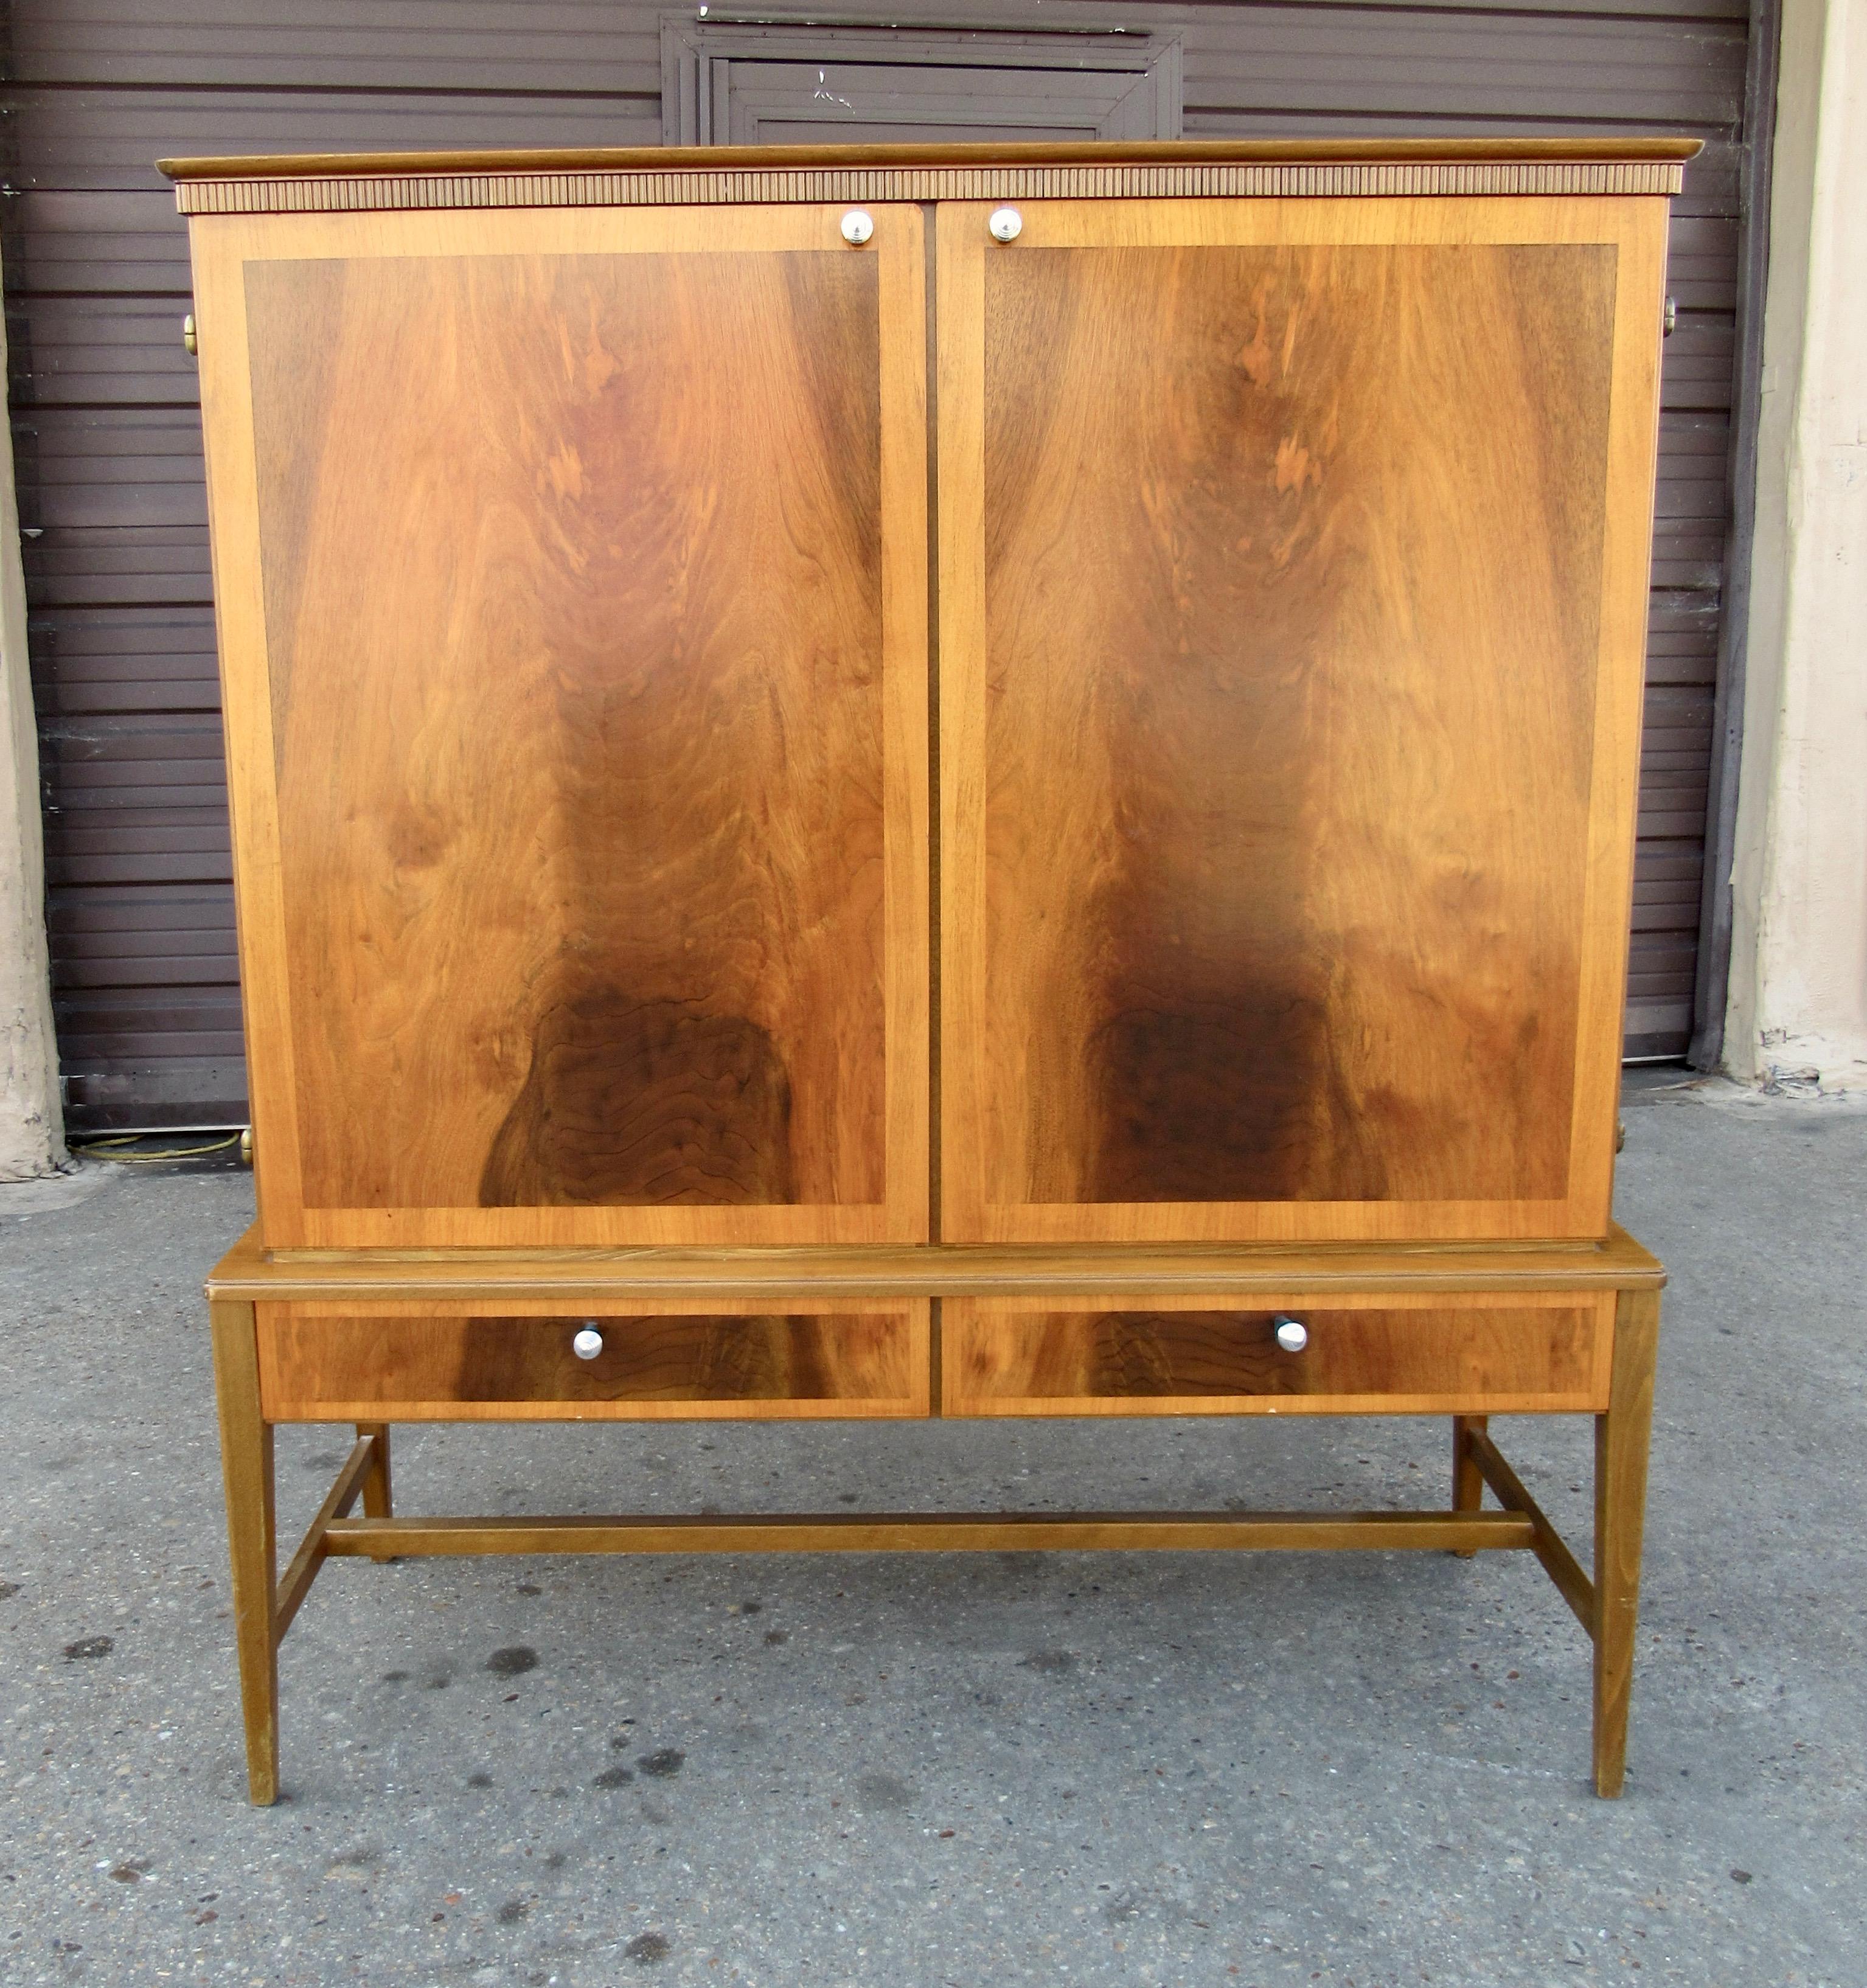 Swedish Mid-Century Modern storage cabinet in beech with inlaid, book matched walnut door panels. Interior consists of adjustable shelves and pull out / pull-out drawers. With bronze hinges.
This item has been lightly restored by our crafts men and